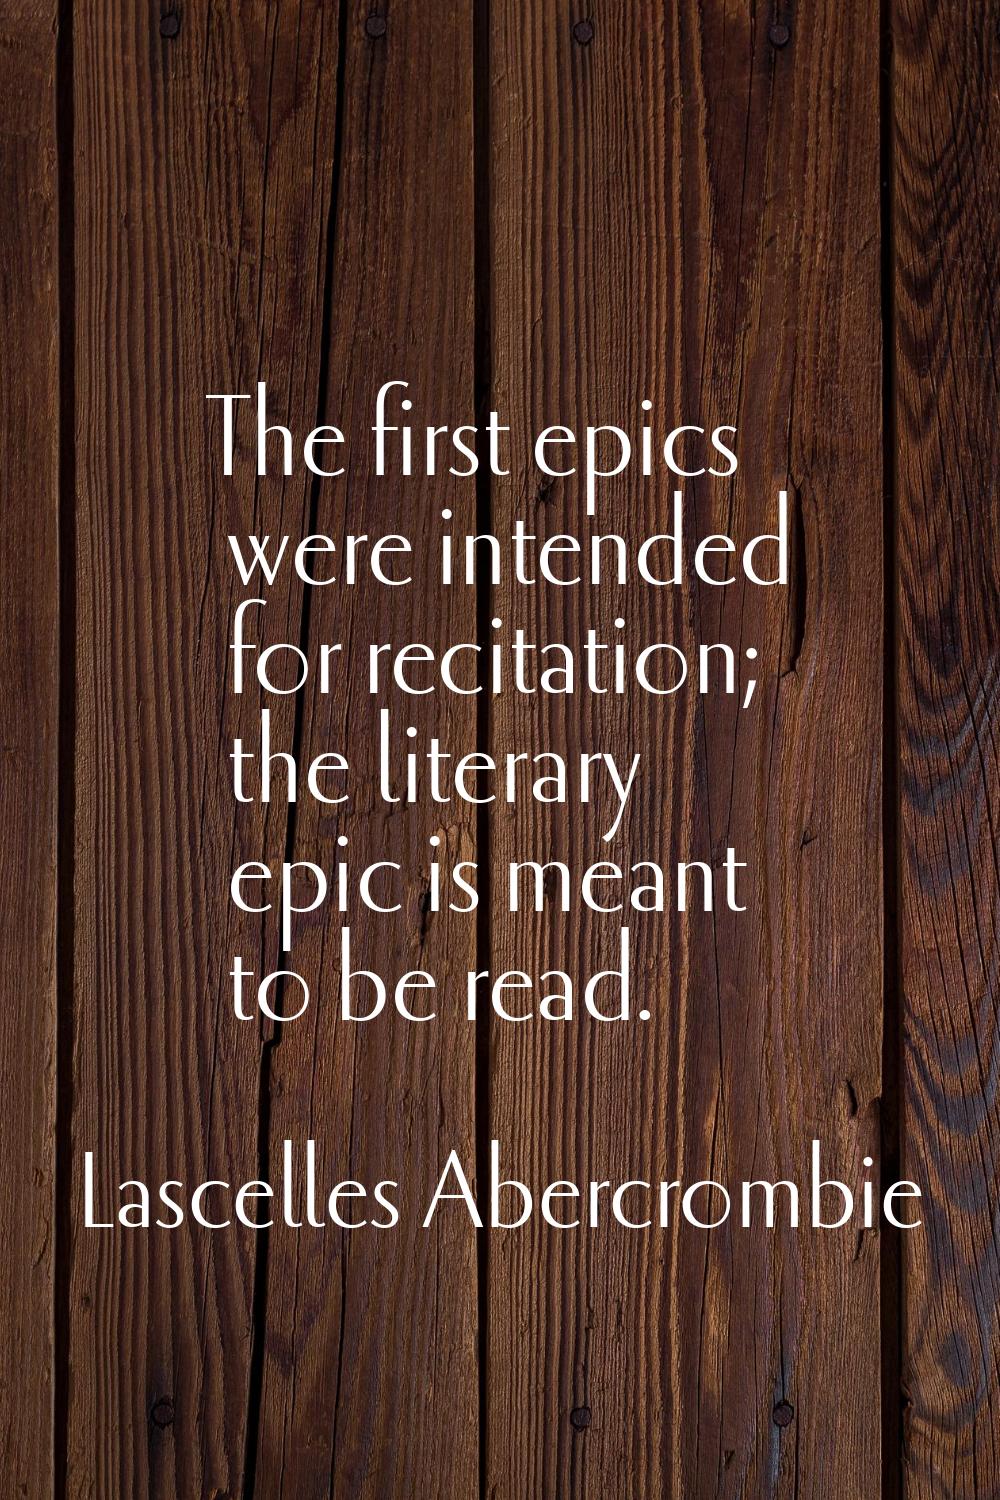 The first epics were intended for recitation; the literary epic is meant to be read.